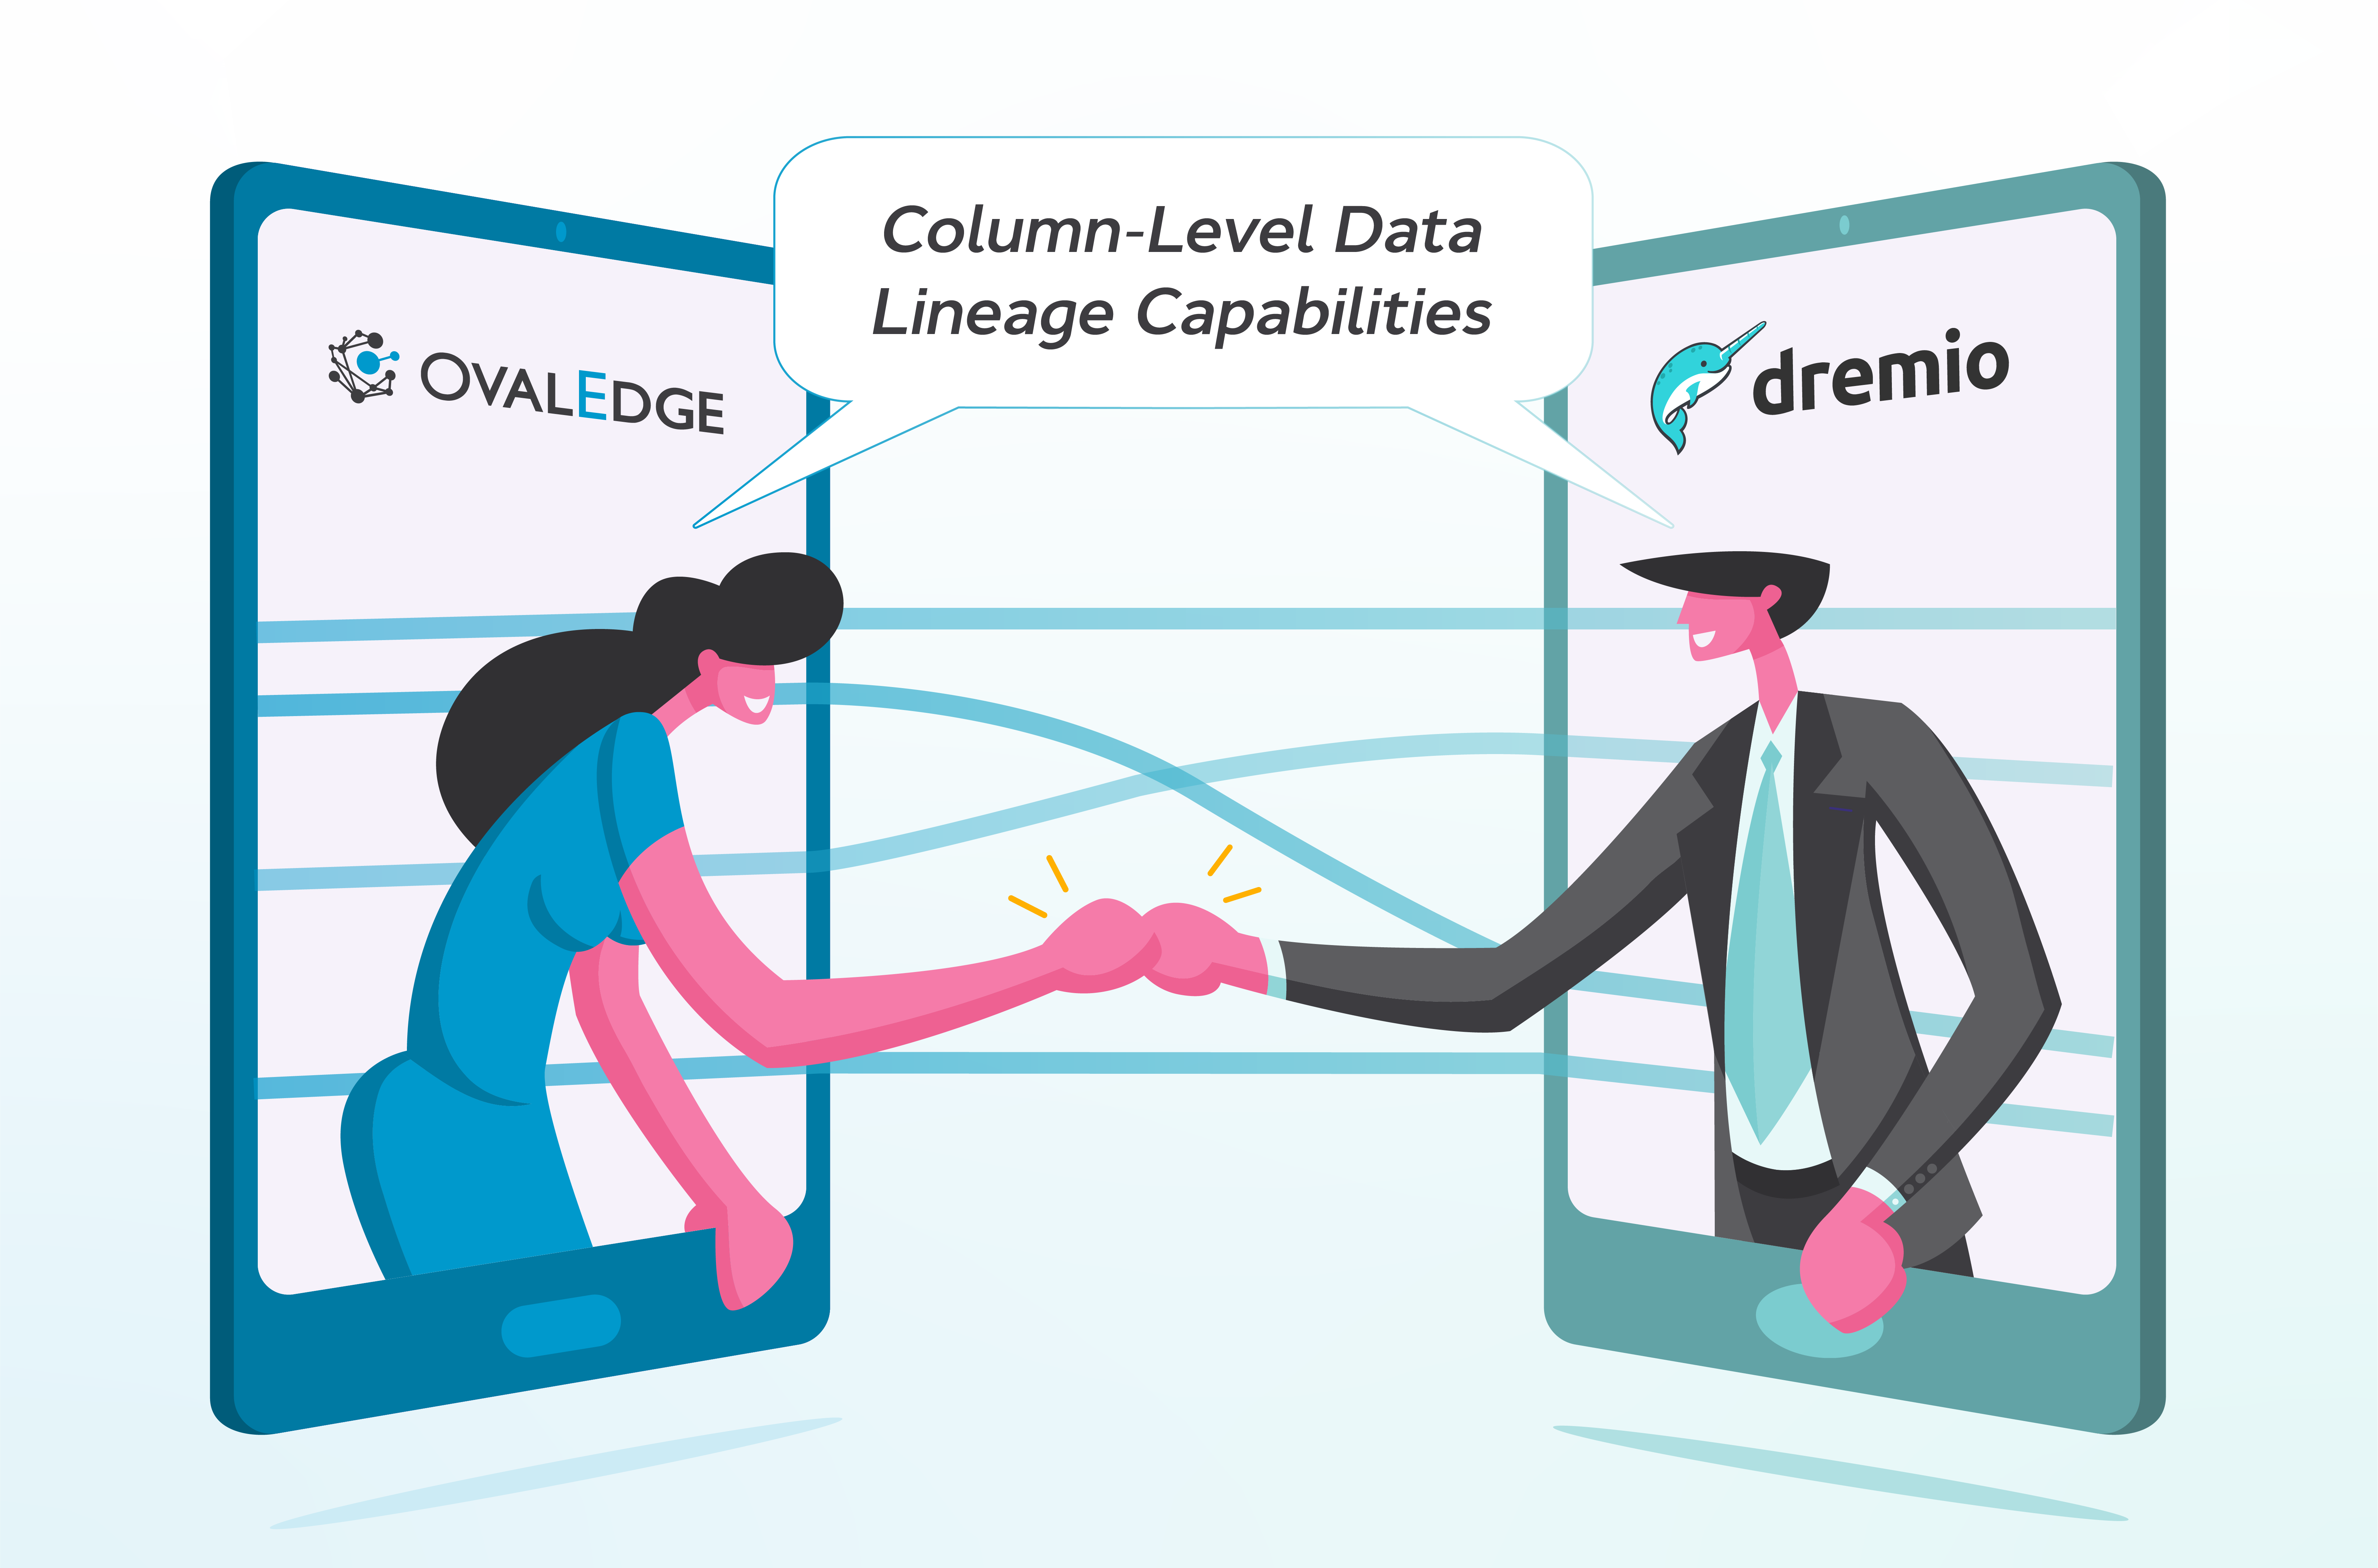 How OvalEdge Supports Column-Level Lineage With Dremio